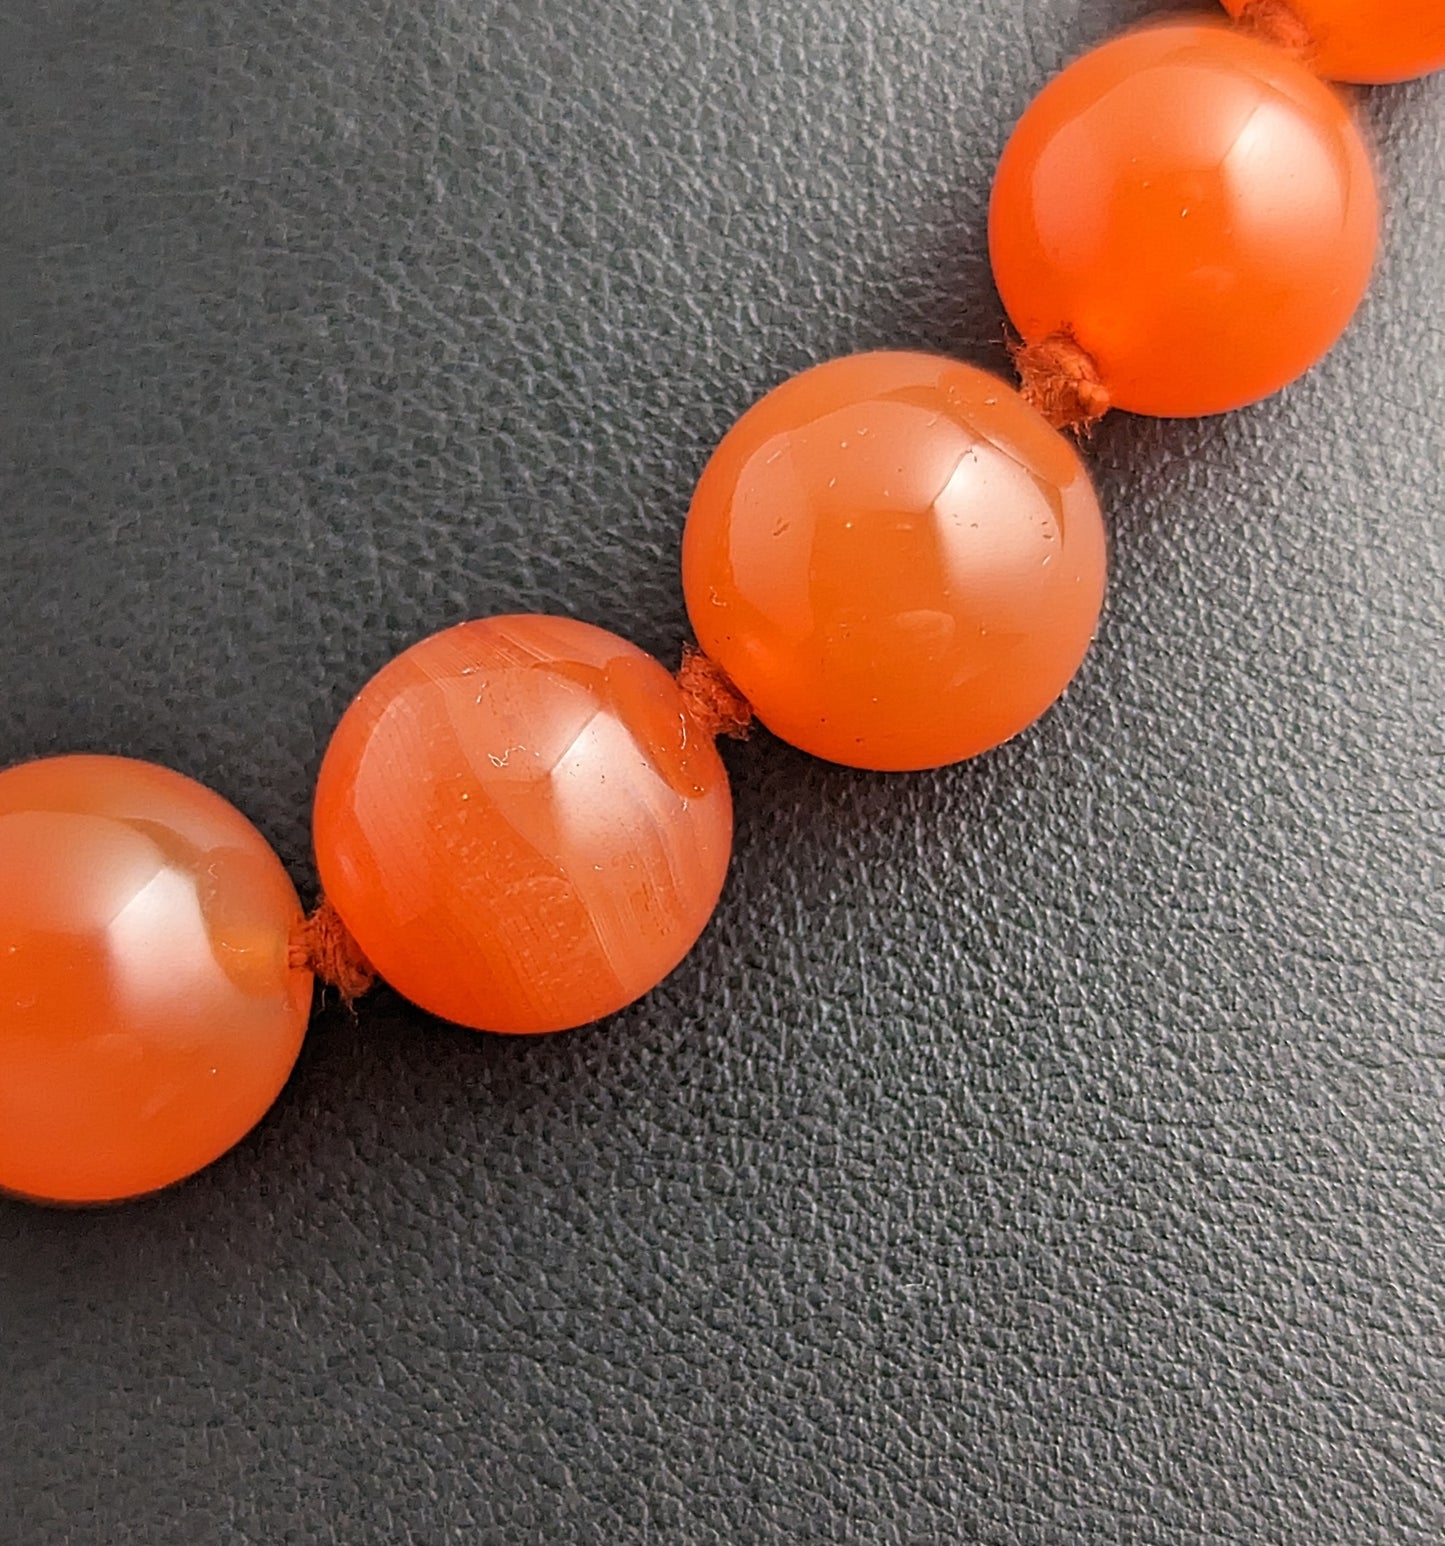 Antique Victorian Carnelian bead necklace, 9ct gold